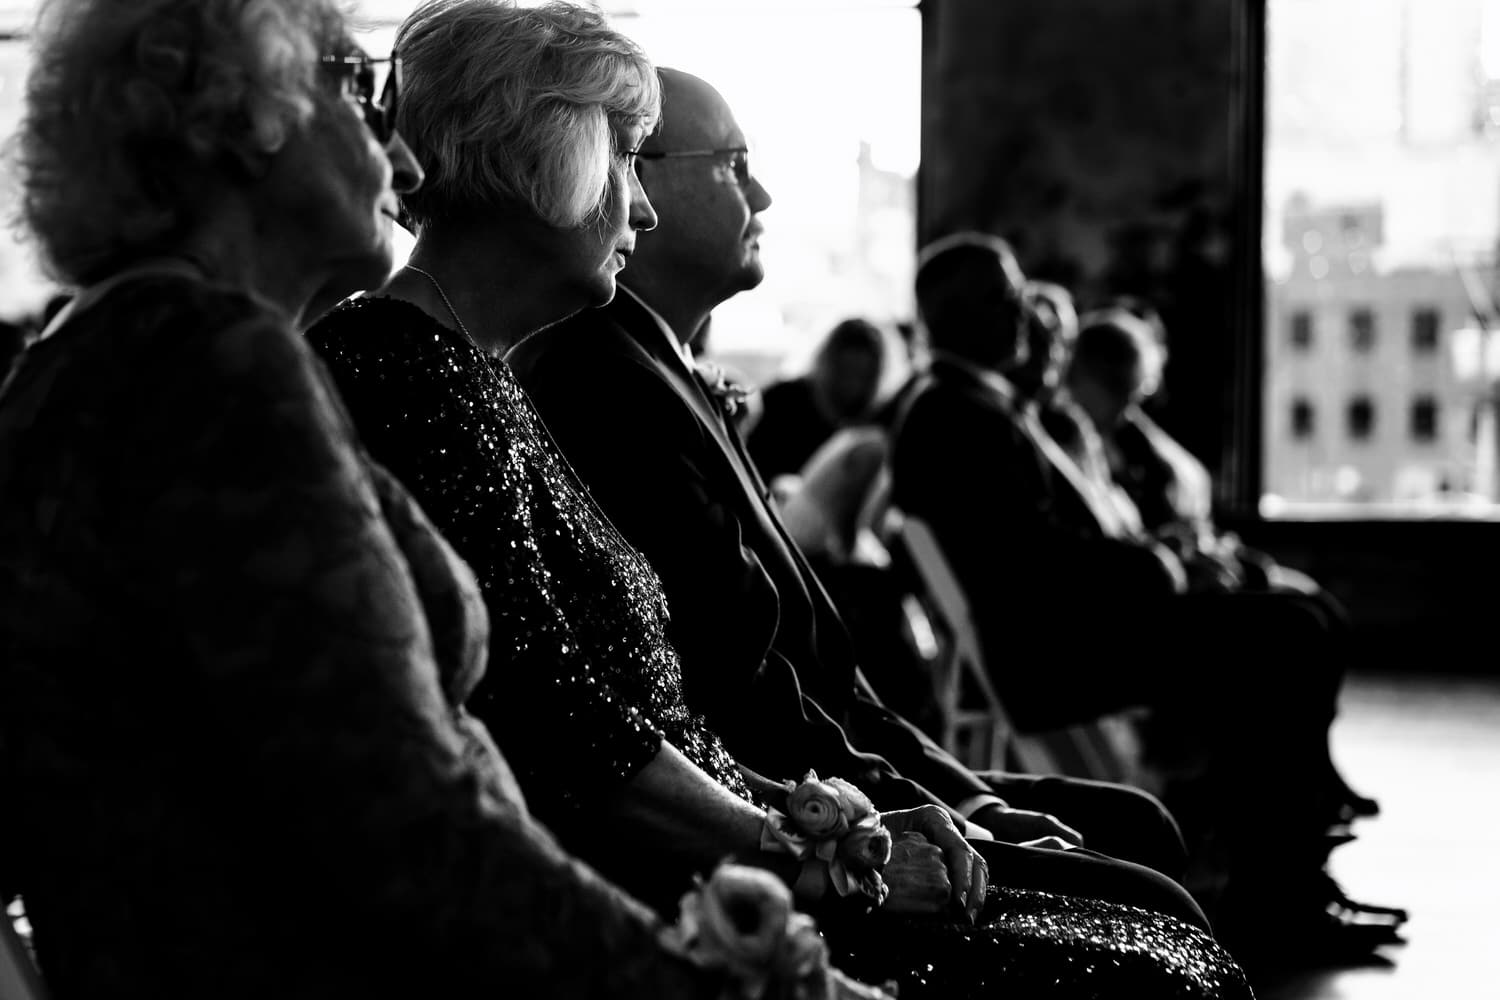 A candid black and white picture, focused on the grooms parents as they watch a wedding ceremony. 